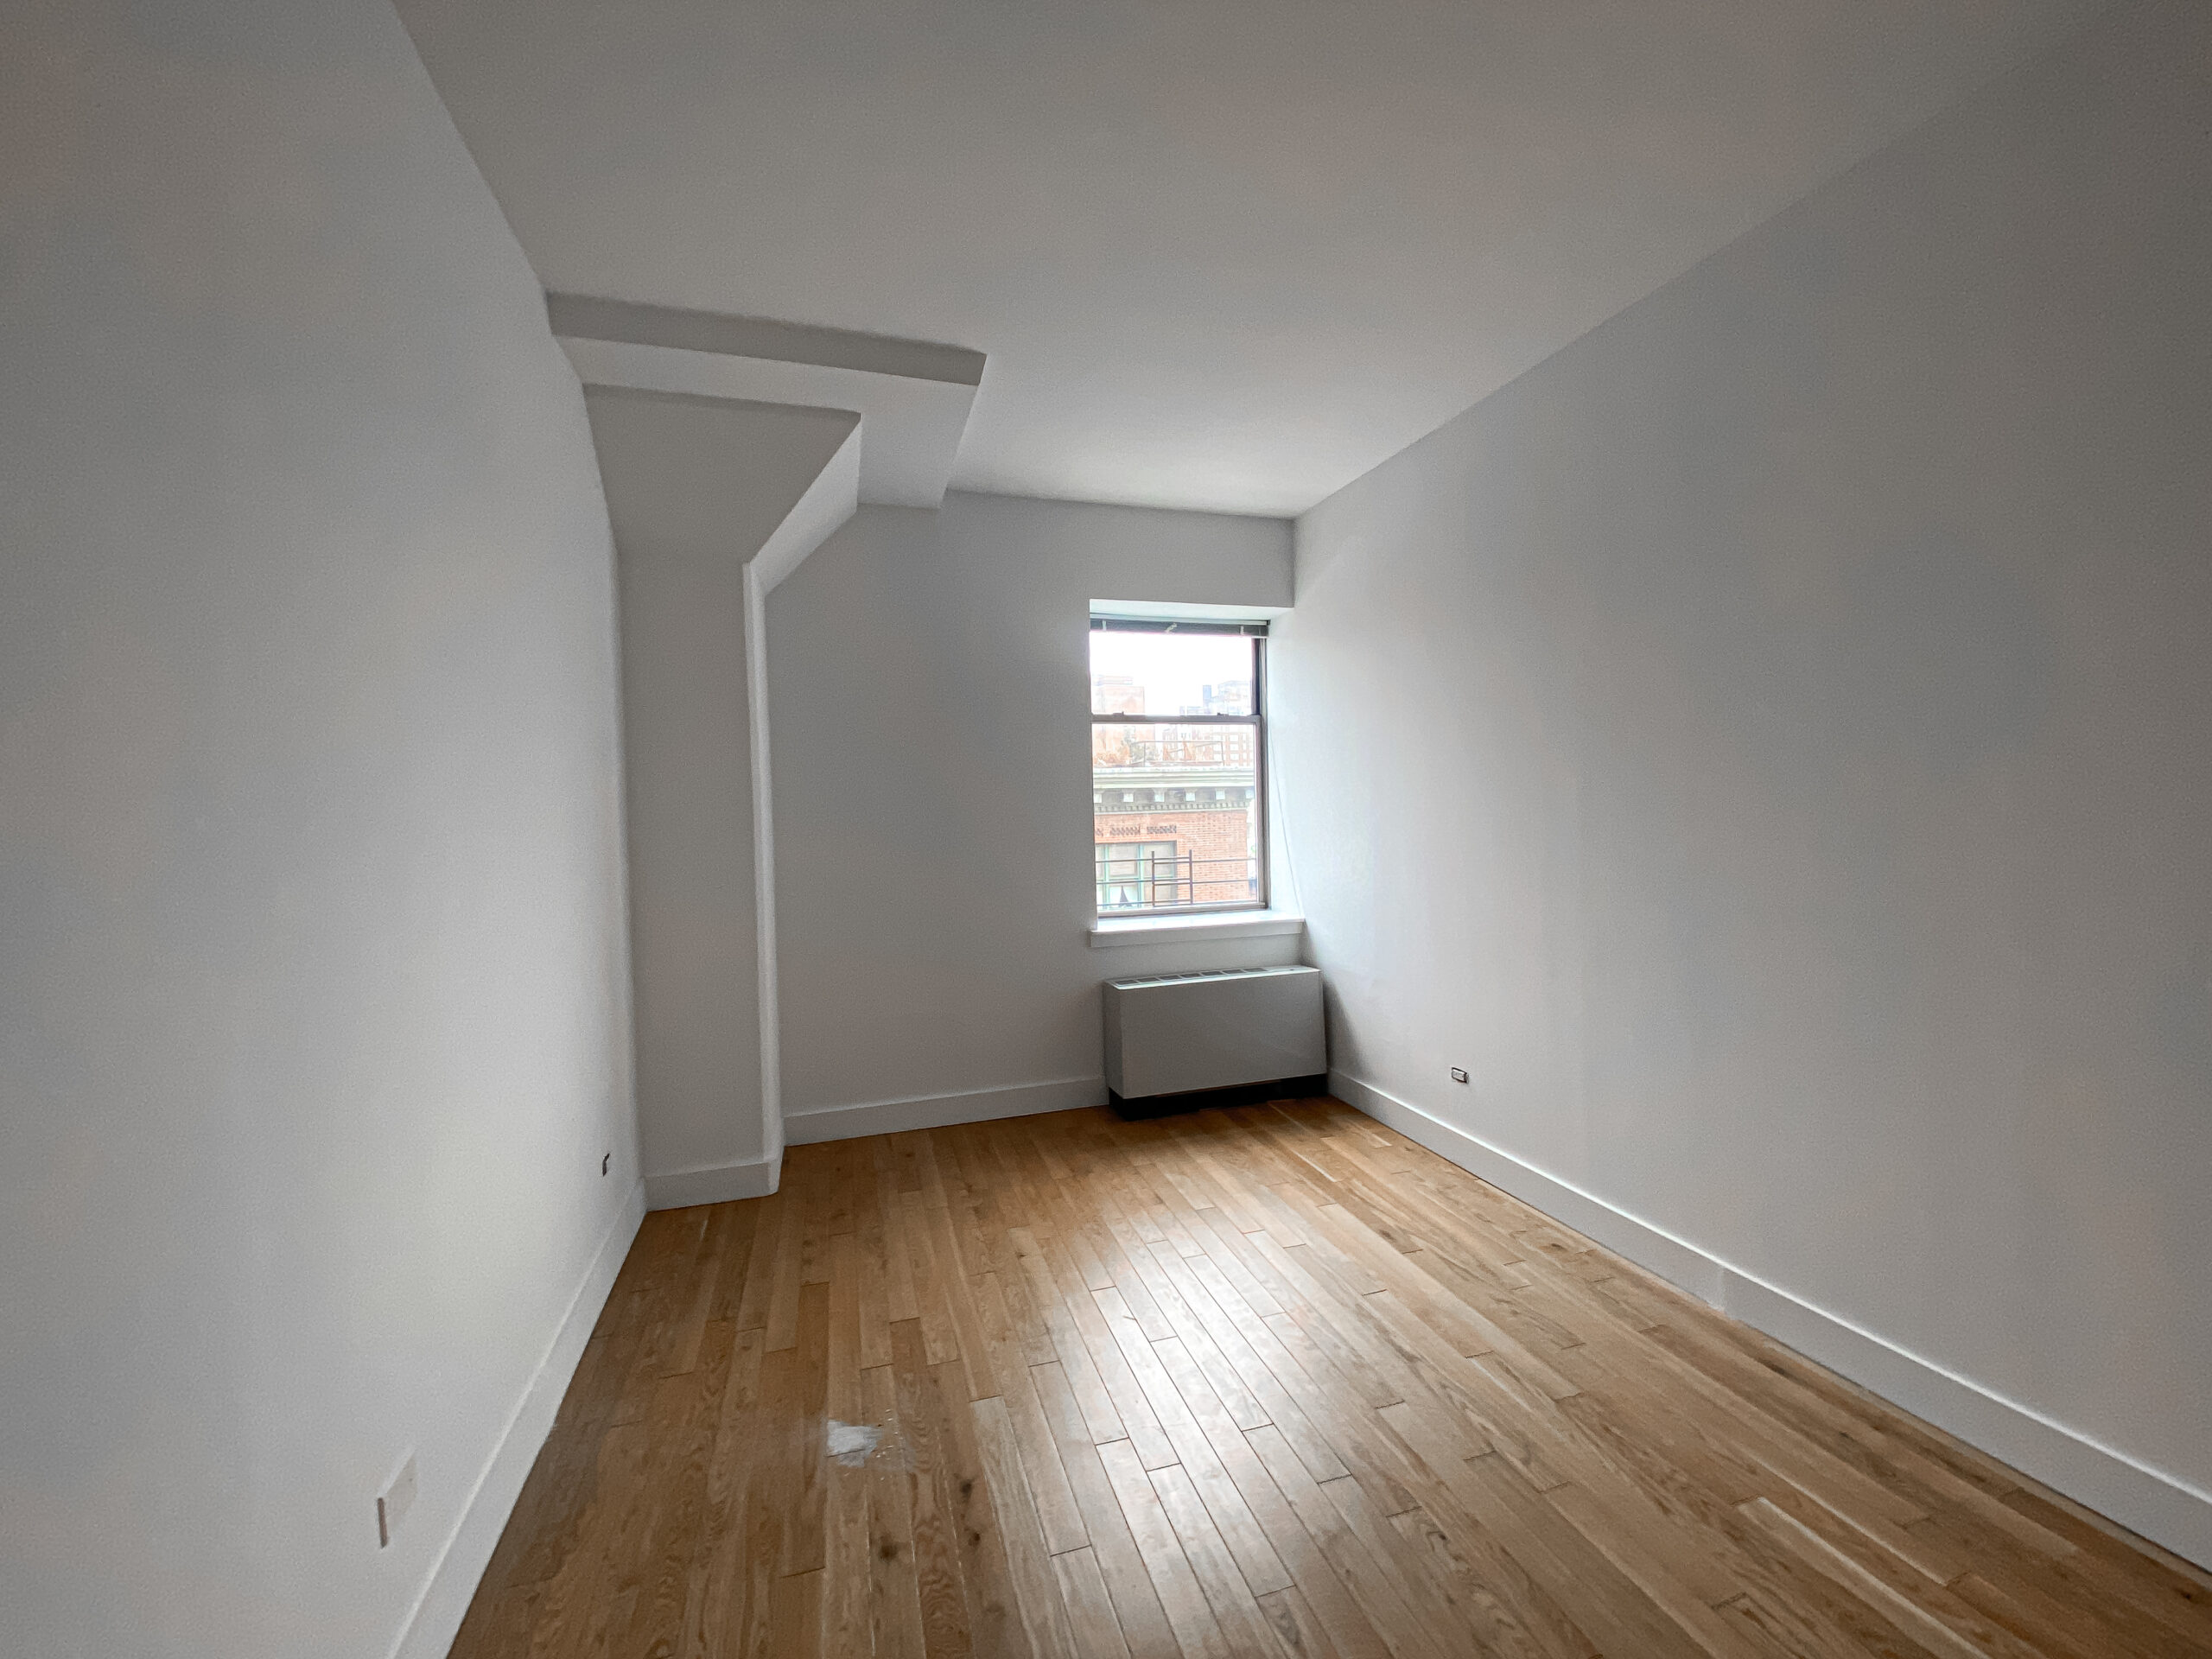 Luxury Loft One Bedroom With Southern Exposure– $5,000